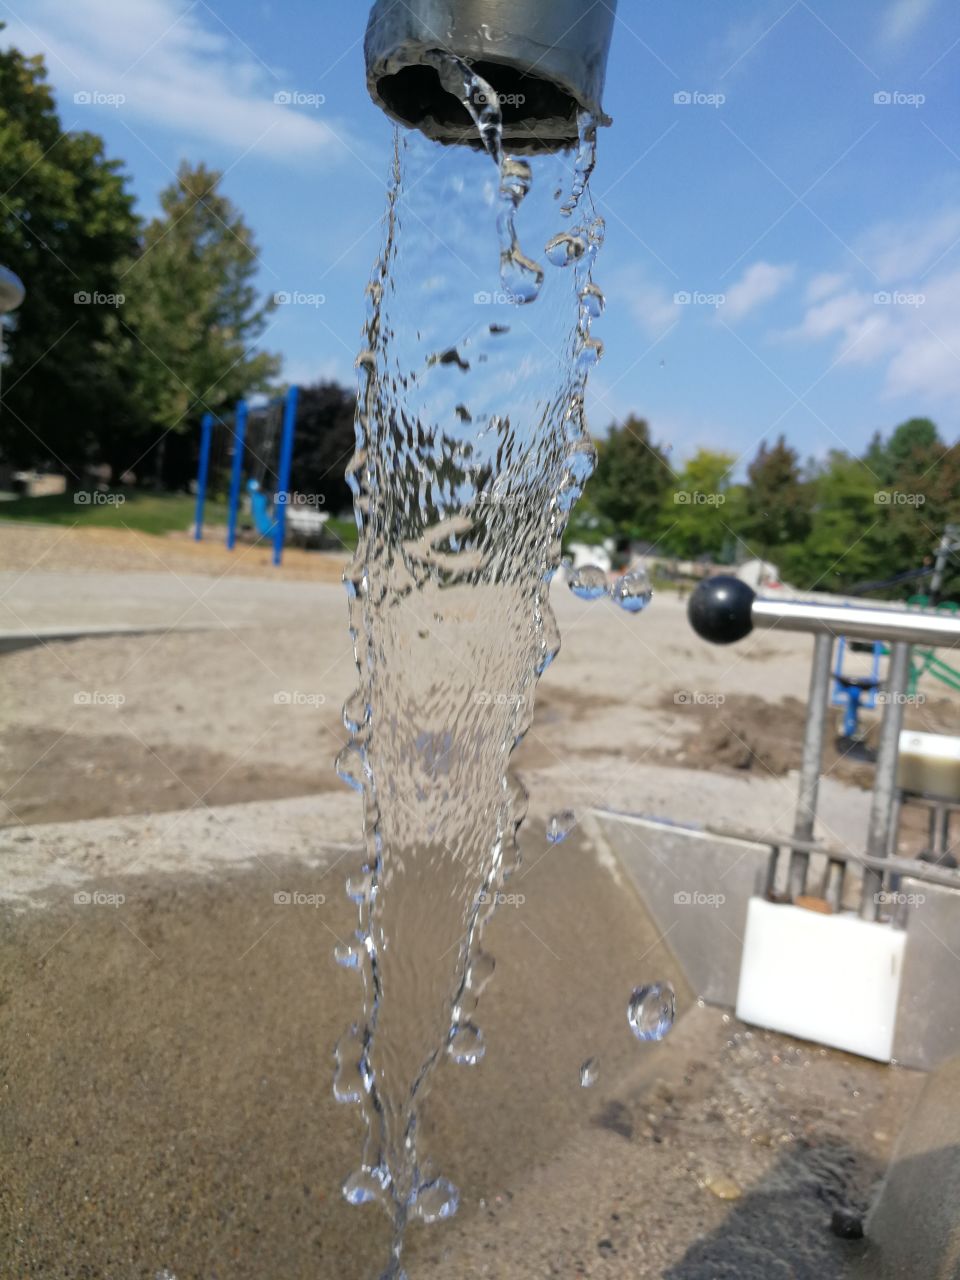 water at the park.